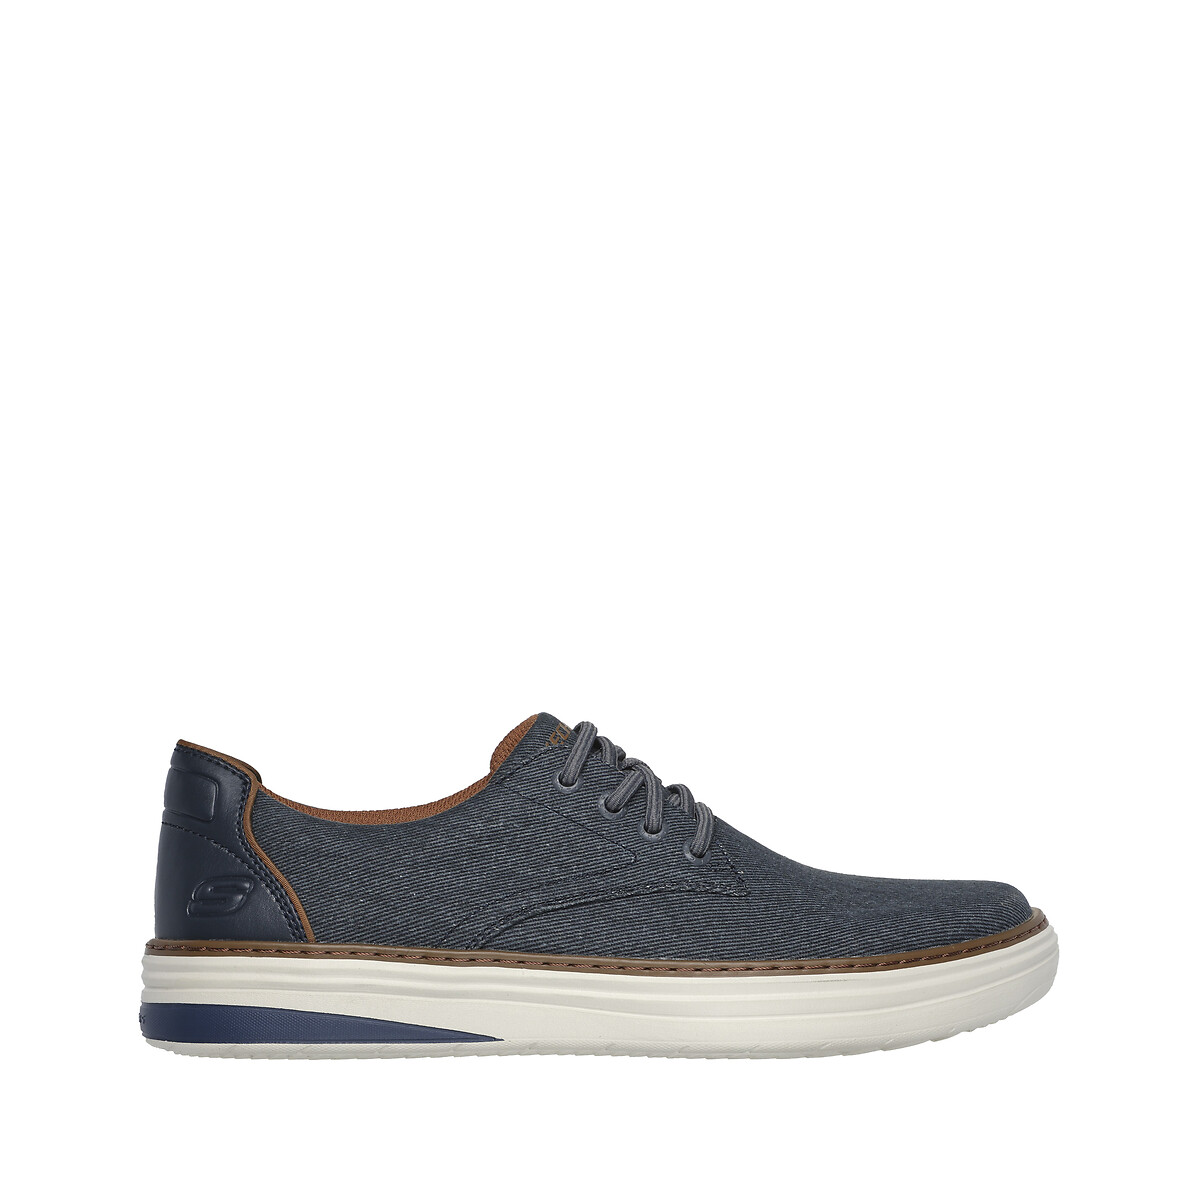 Hyland - Ratner Canvas Trainers